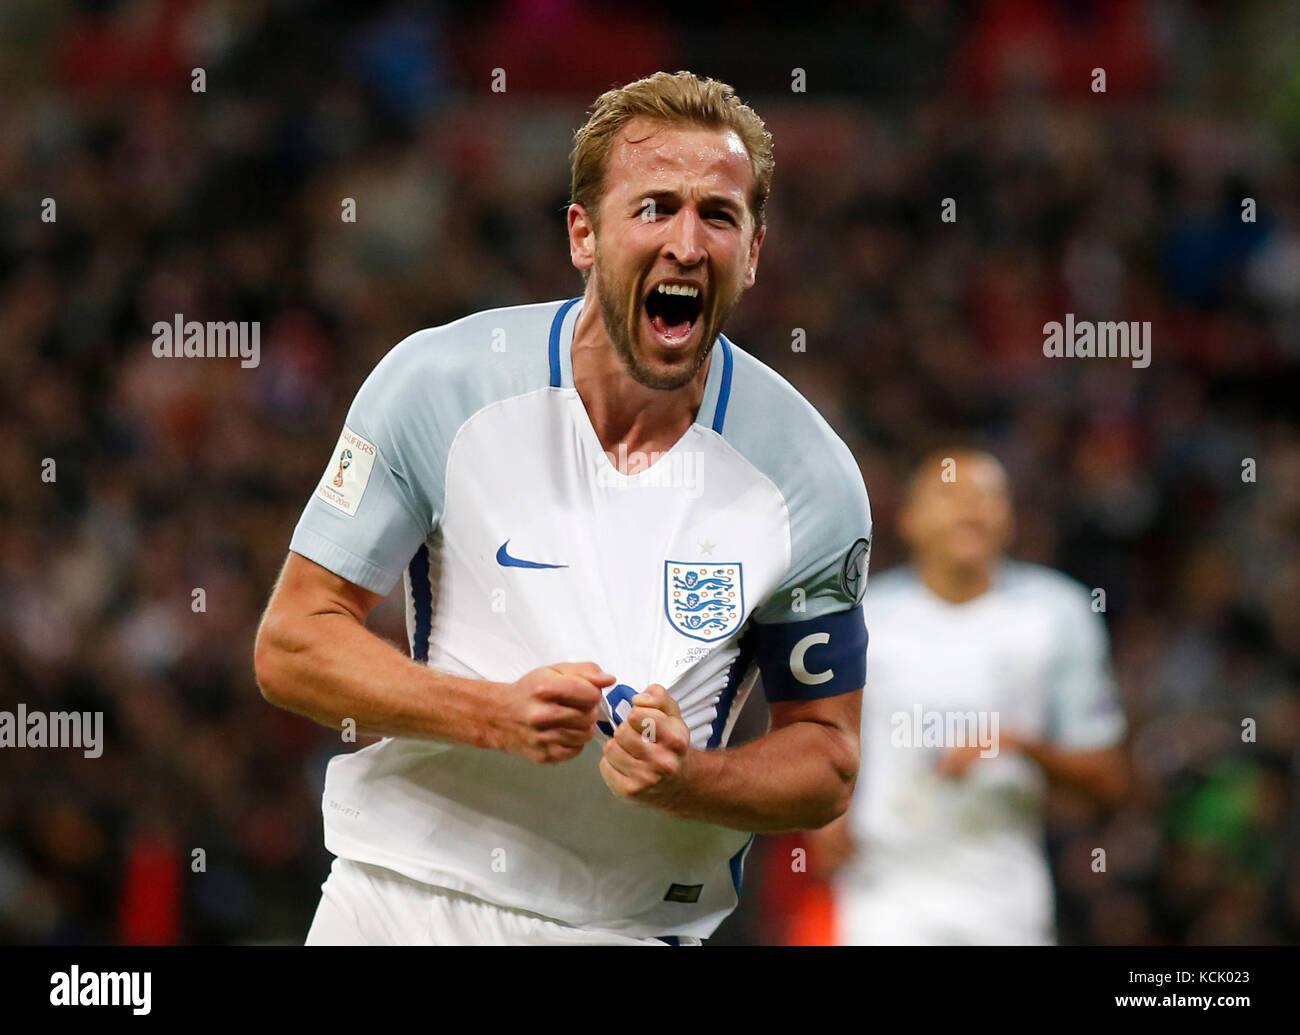 London, UK. 05th Oct, 2017. London, UK. 05th Oct, 2017. Harry Kane of England celebrates after making it 1-0 during the Group F World Cup qualifier between England and Slovenia played at Wembley Stadium, London on 5th October 2017 Credit: Jason Mitchell/Alamy Live News Credit: Jason Mitchell/Alamy Live News Stock Photo